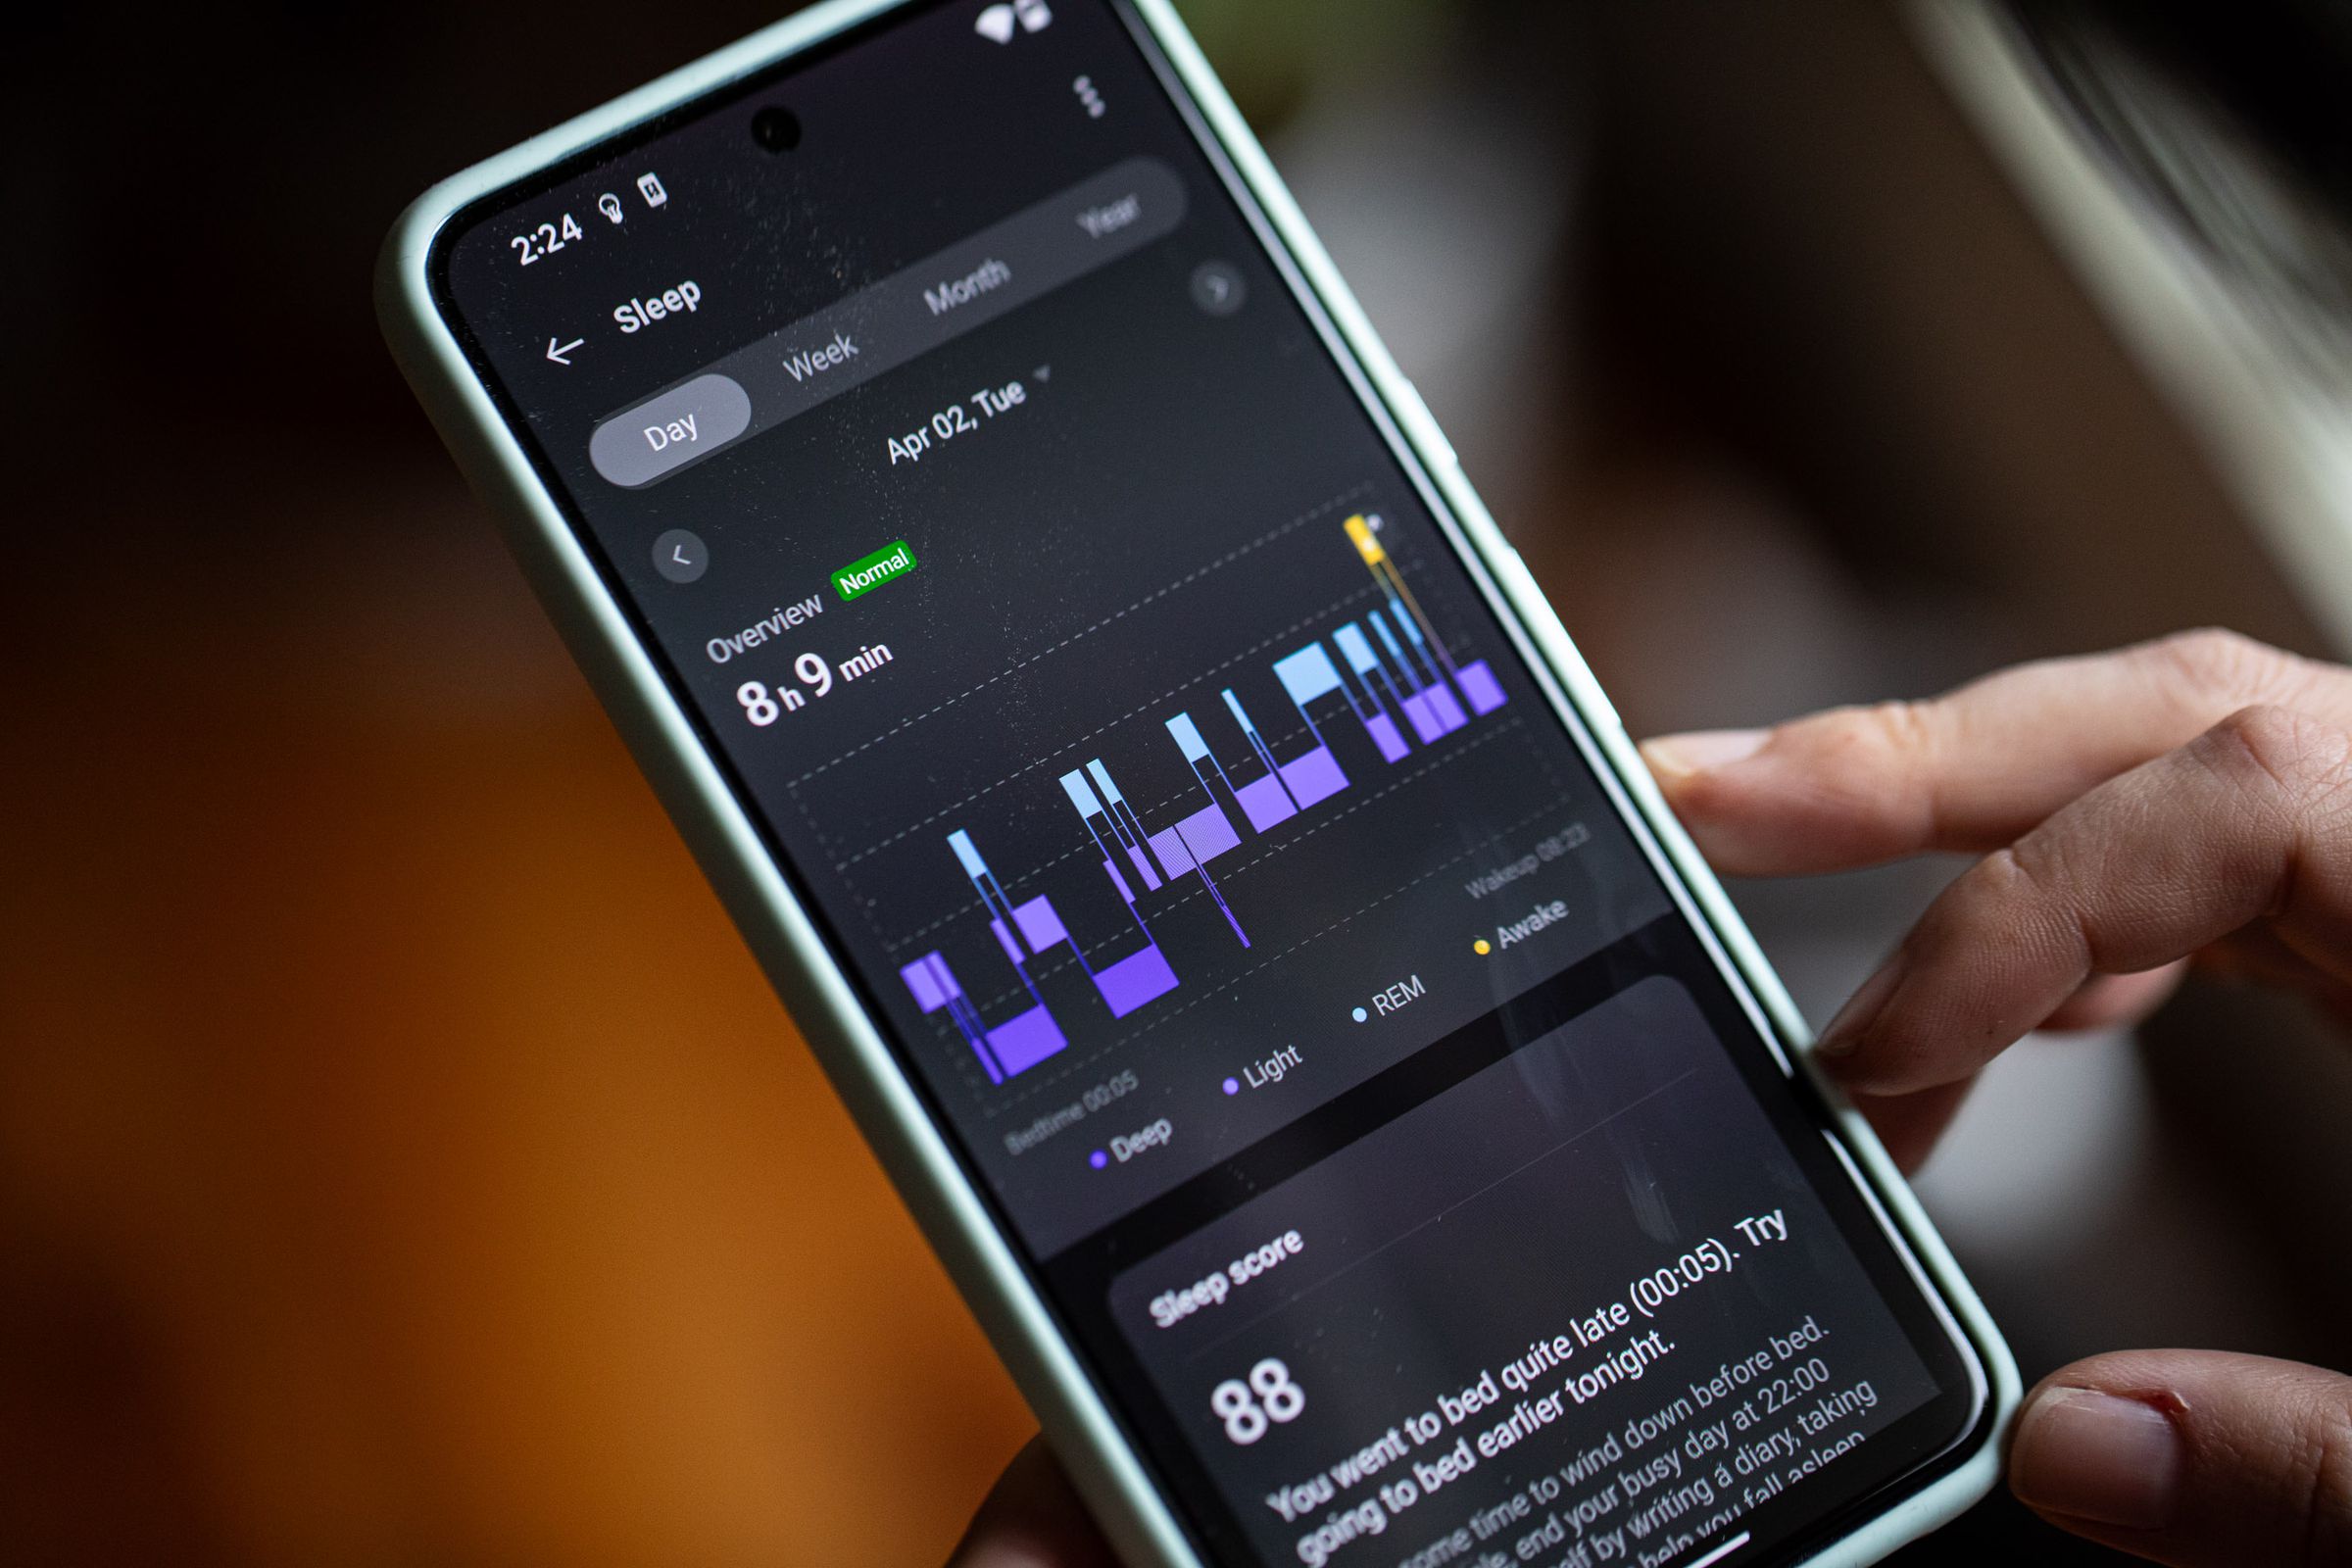 Look at OnePlus’ mobile app with sleep chart pulled up